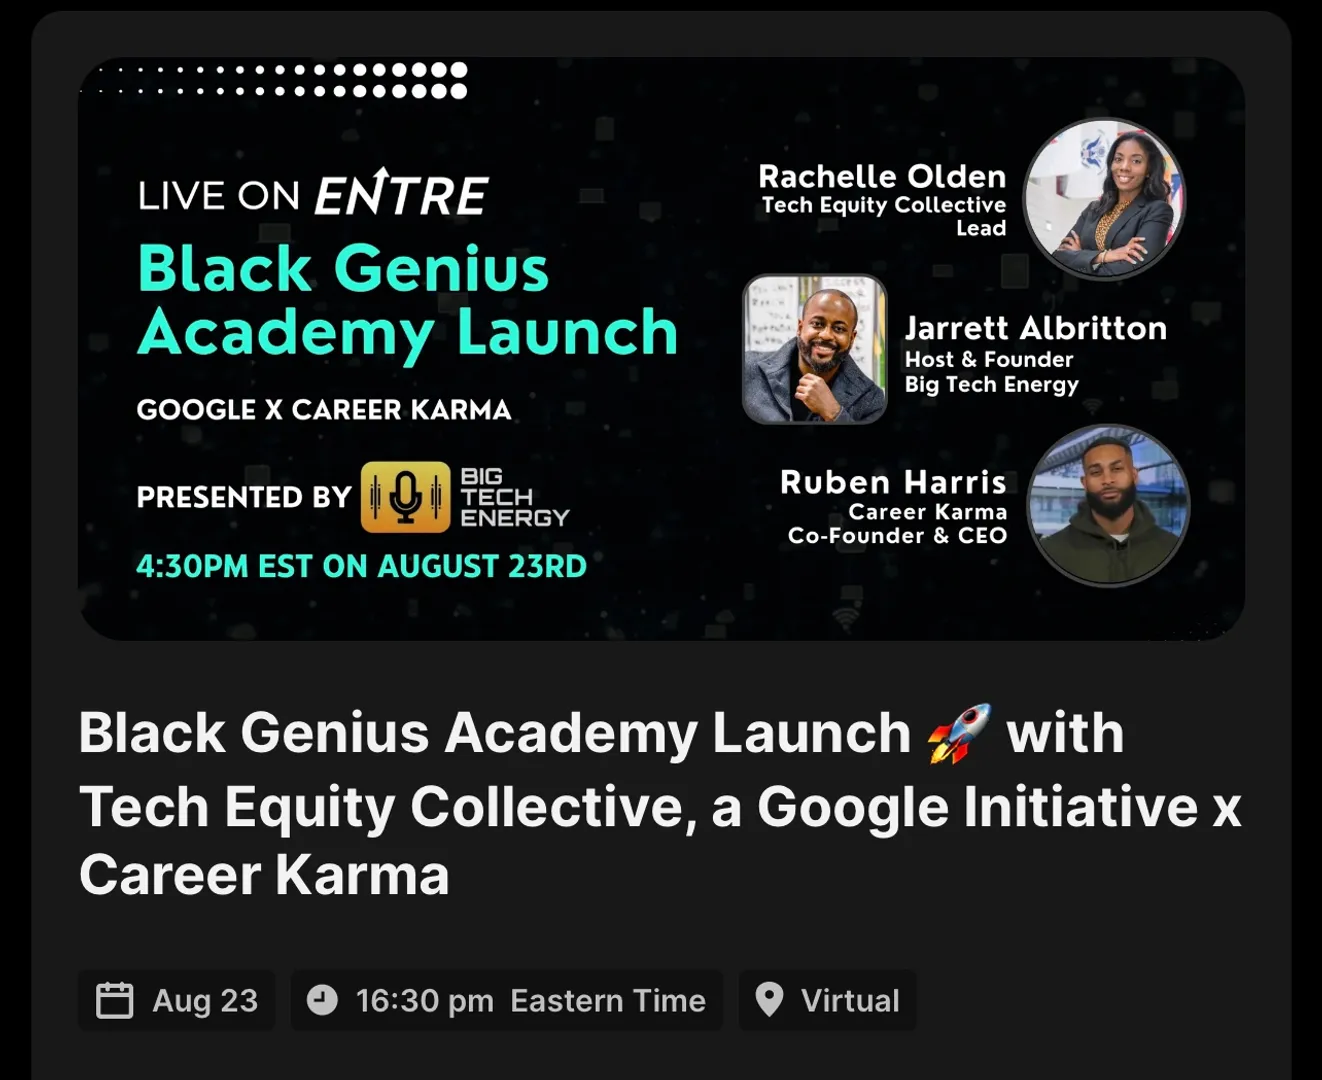 Today at 4:30 PM ET, join me on Entre to learn about the launch of the Black Genius Academy, a free tech career exploration app that provides resources and guidance to help people succeed in technical education programs to land jobs.

RSVP via the link below, we will do a live Q&A as well if time permits. If you miss the live stream, it will be uploaded to YouTube and all audio platforms on the @bigtechenergypodcast channels.

https://joinentre.com/event/a45a6dec-a9e4-4cc0-acf2-0f218098967b